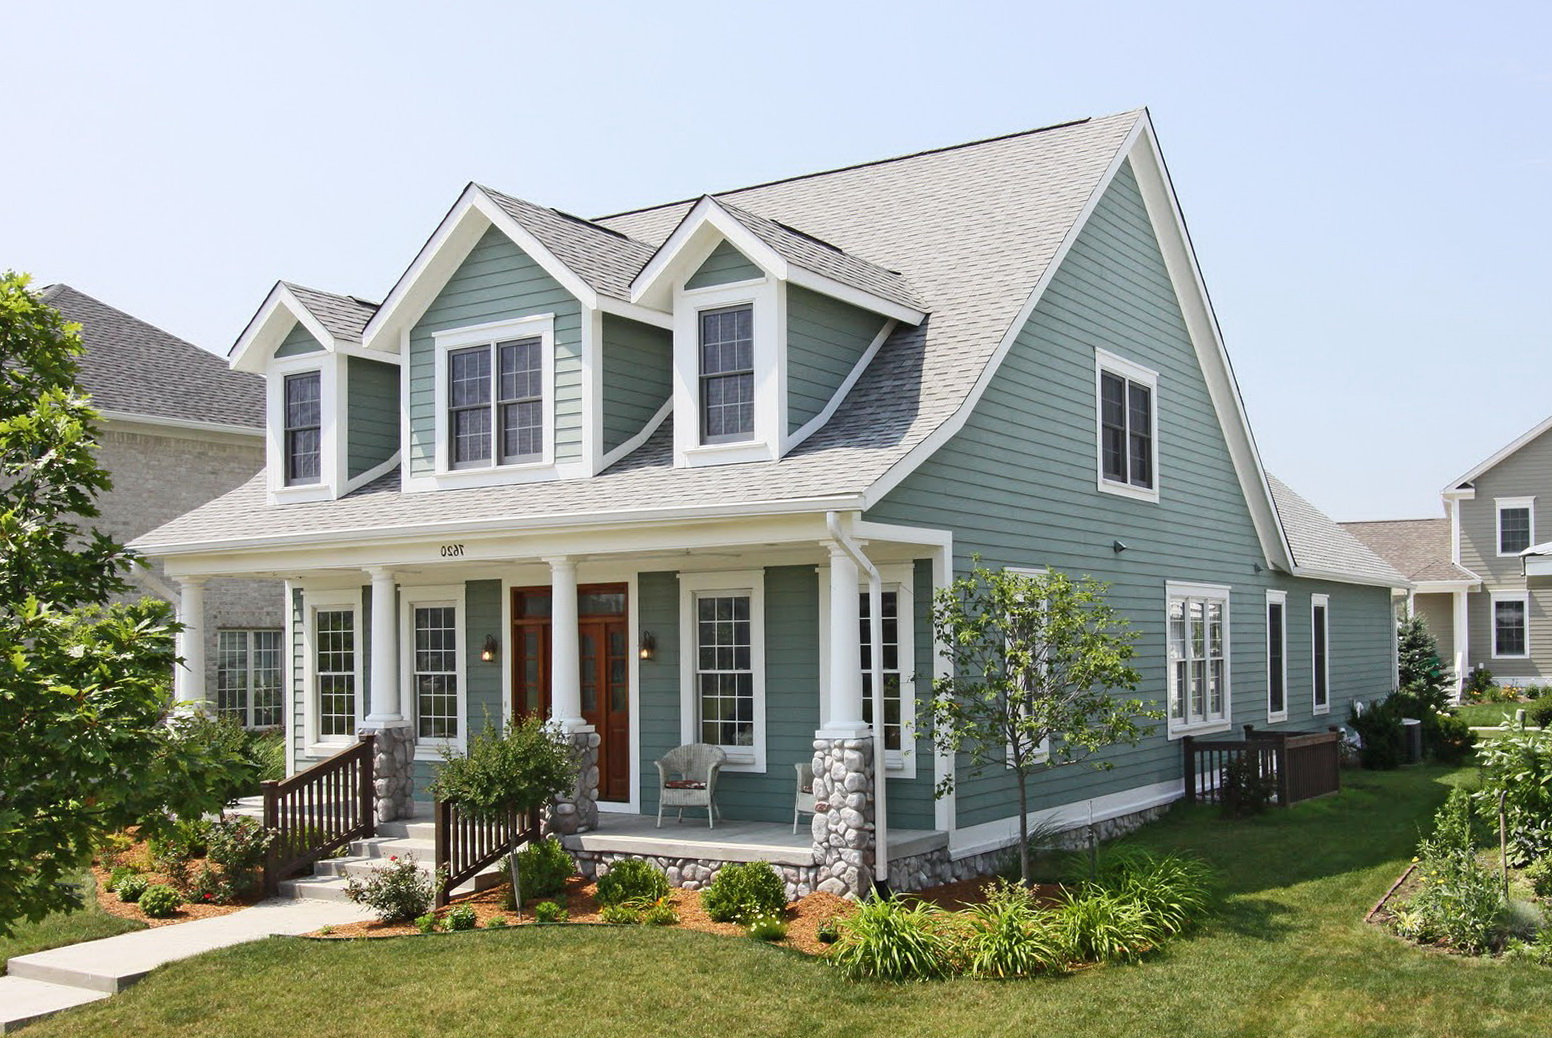 Add Front Porch To Cape Cod Home Design Ideas throughout